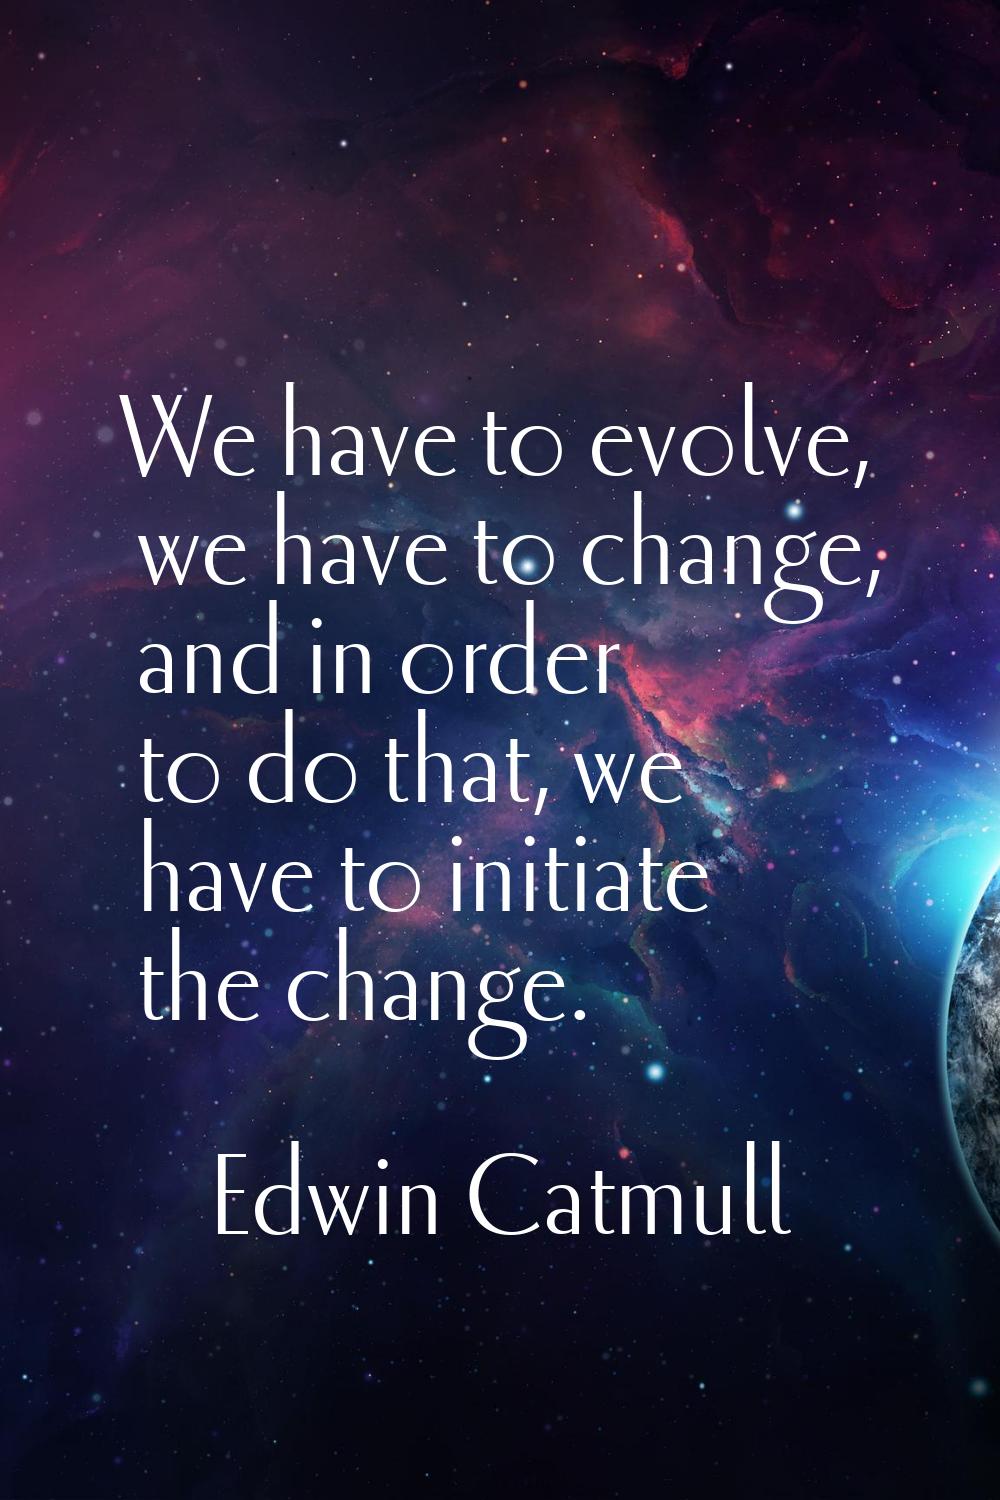 We have to evolve, we have to change, and in order to do that, we have to initiate the change.